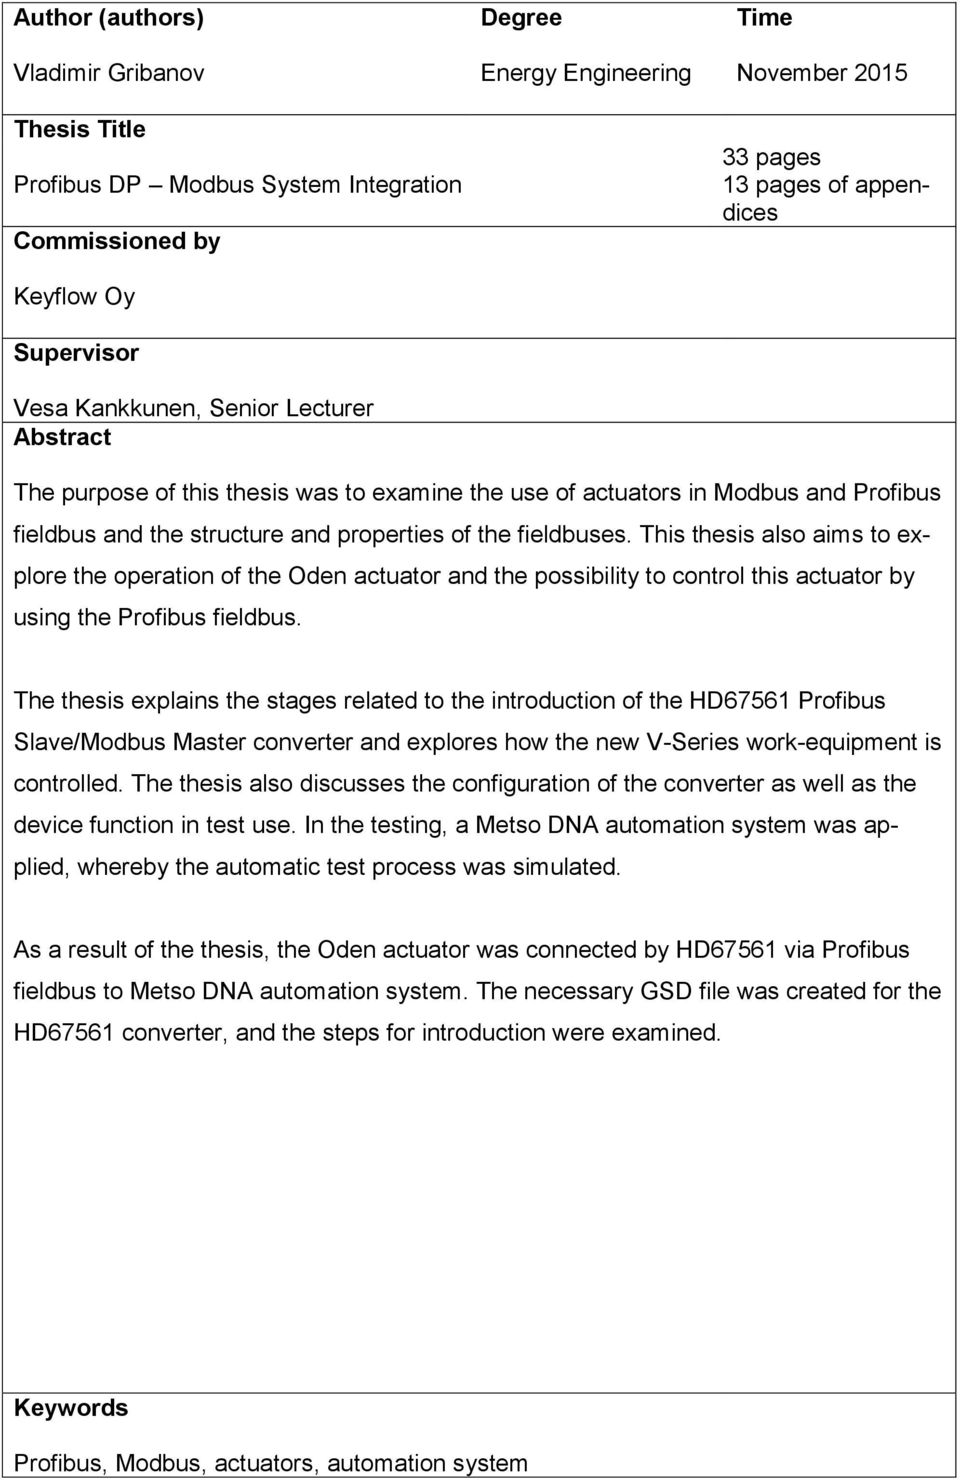 This thesis also aims to explore the operation of the Oden actuator and the possibility to control this actuator by using the Profibus fieldbus.